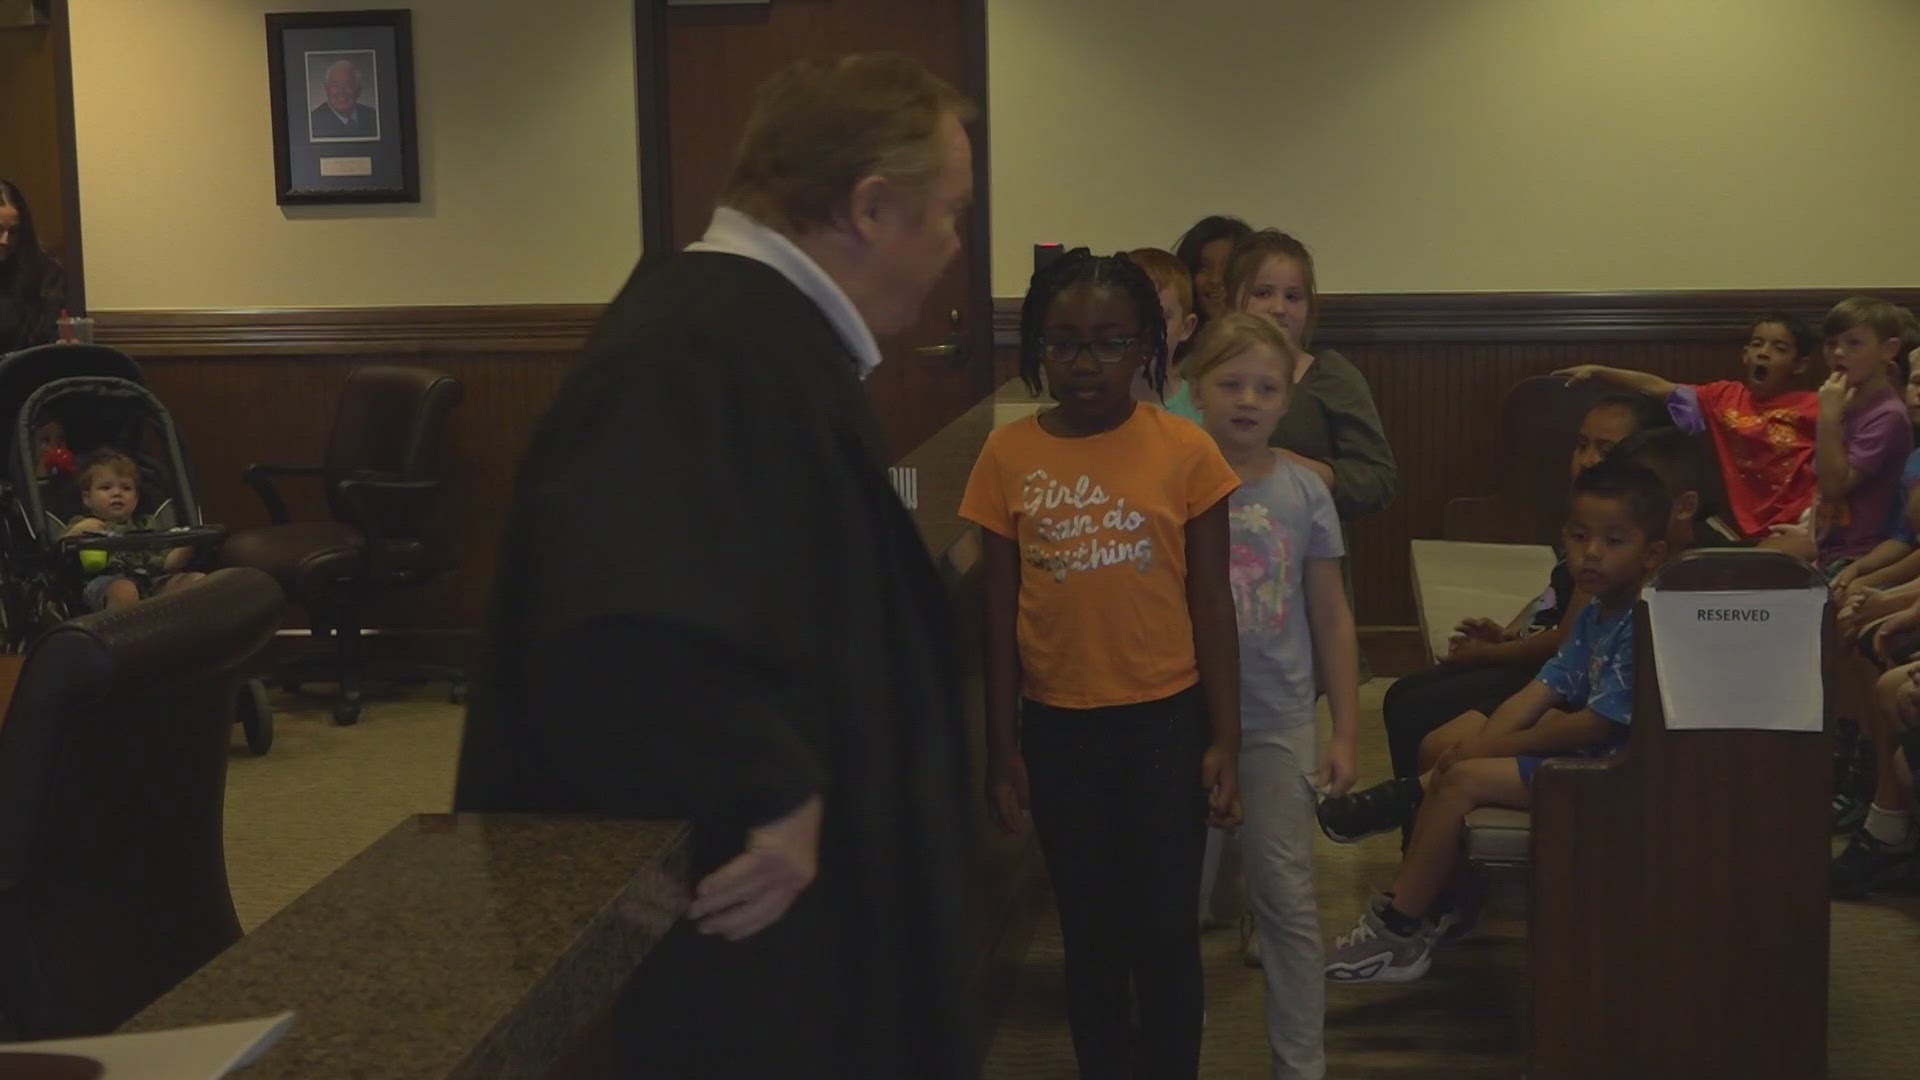 "As a child of MISD for 12 years, I remember going to the old courthouse and remember how fun it was to meet the judges," said Judge Jeff Robnett.